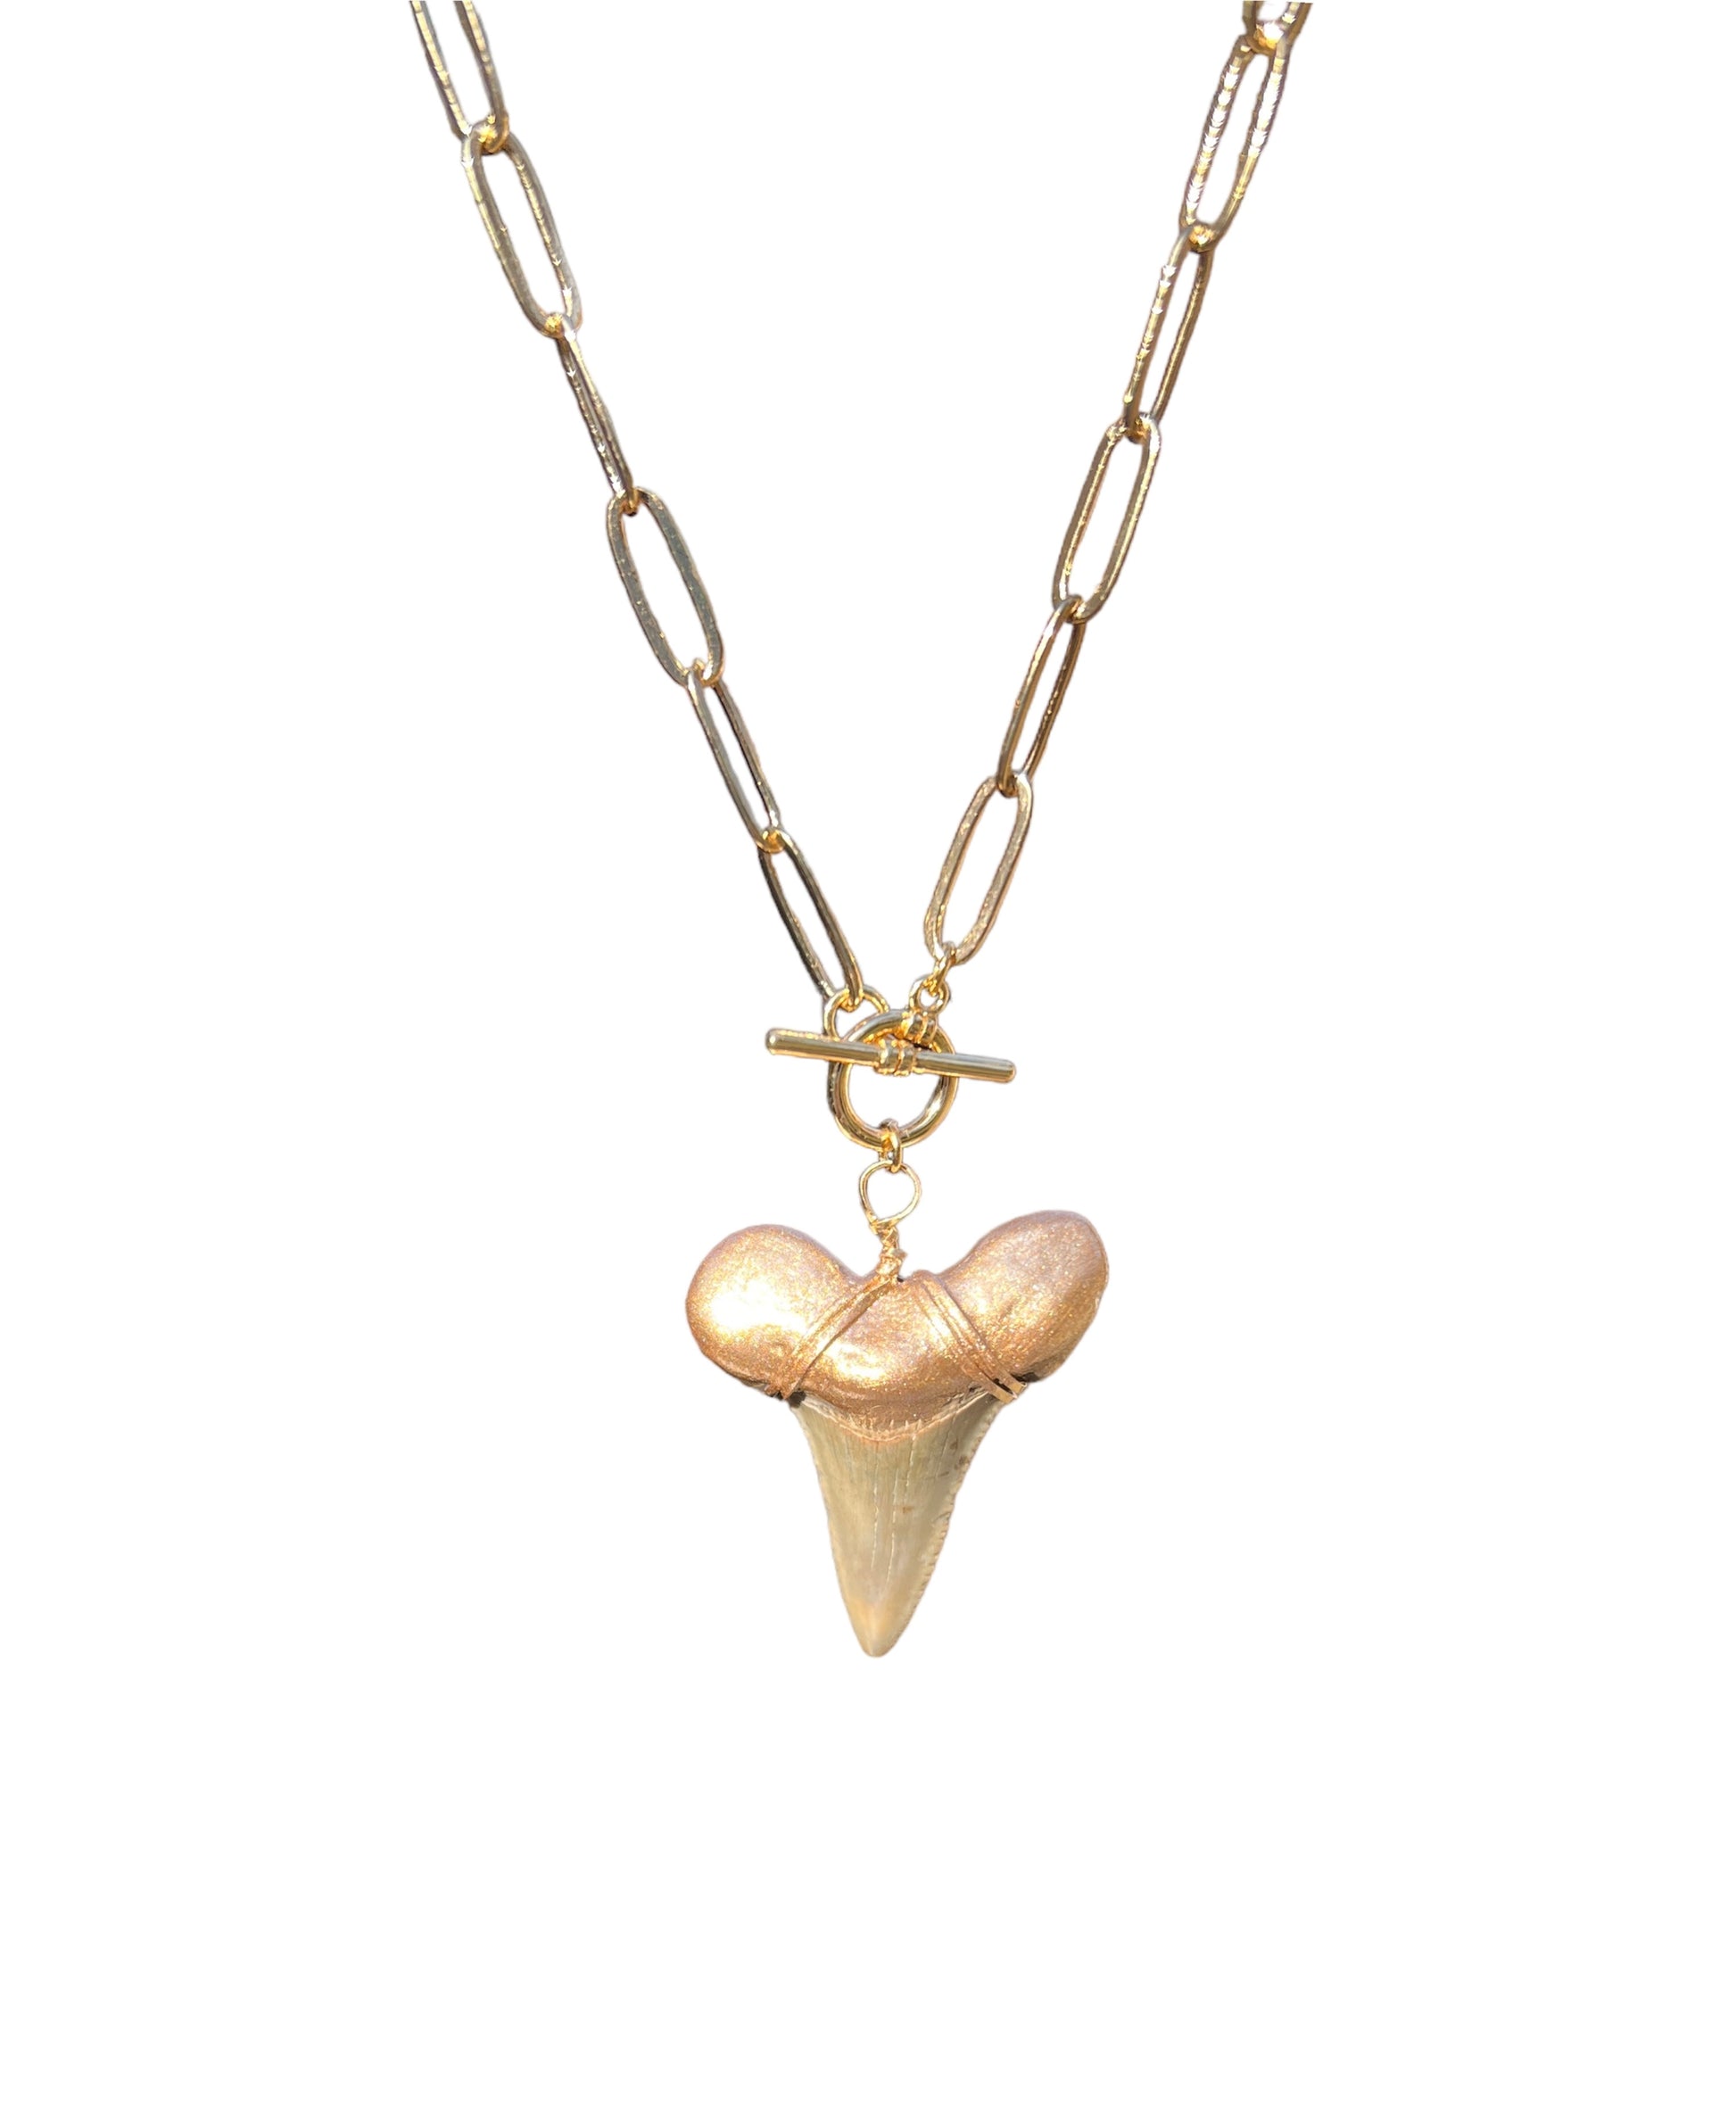 Real shark tooth necklace—Large gold-tip real fossilized megalodon shark tooth pendant on thick link chain ethically sourced —Foxy Fossils 